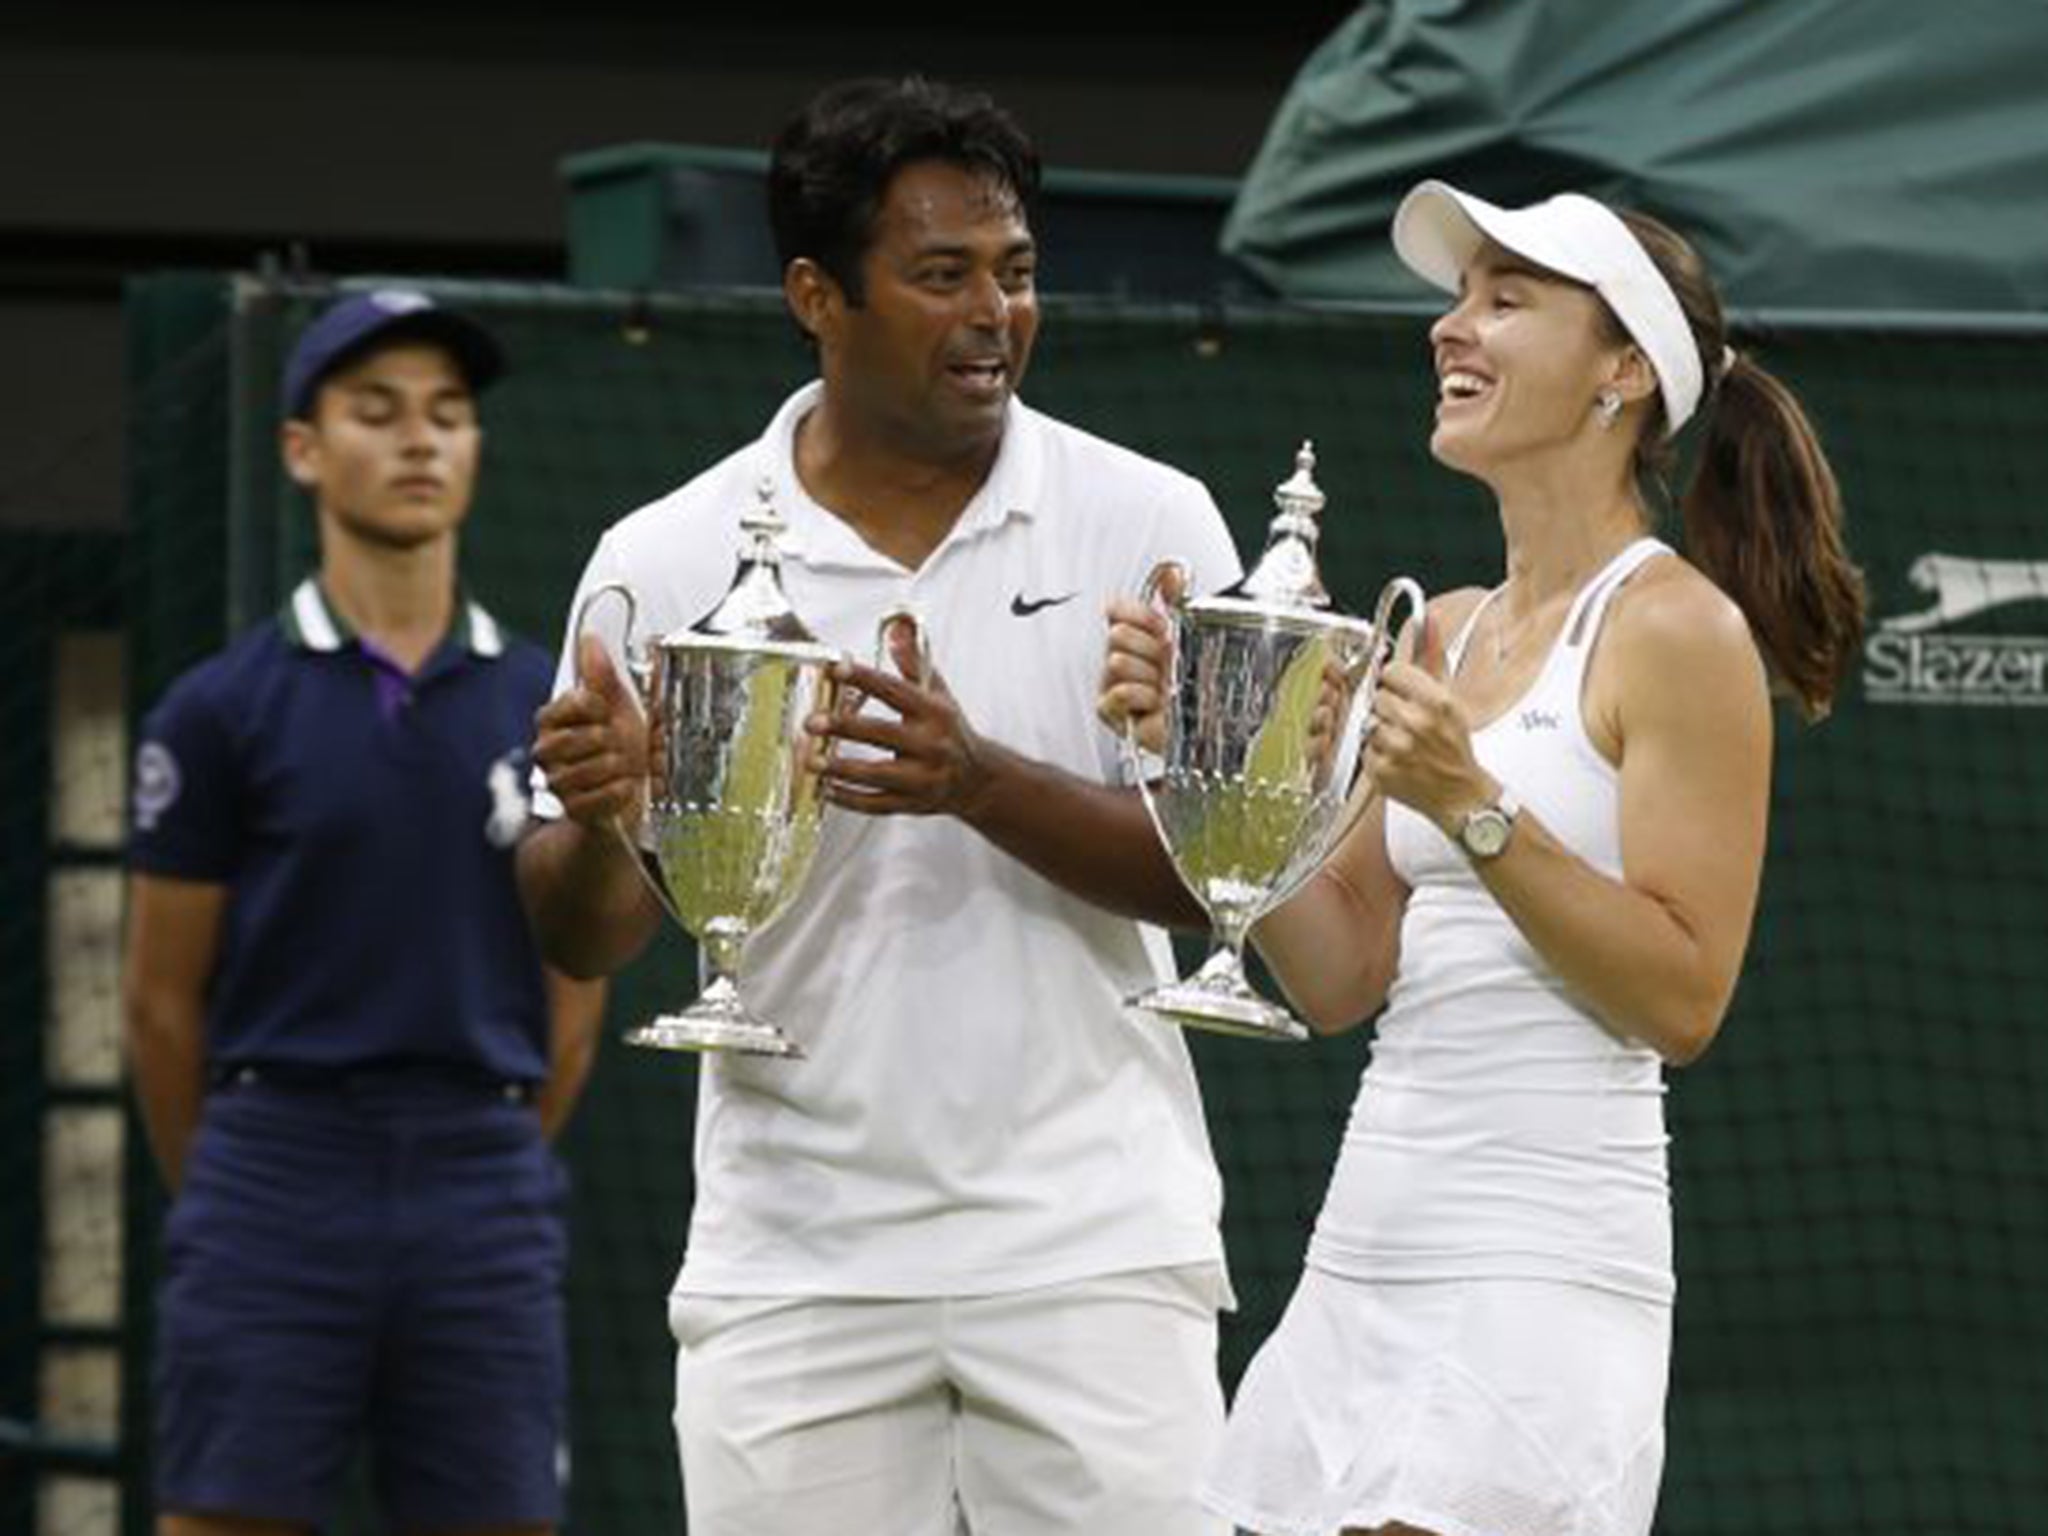 Martina Hingis, right, and Leander Paes hold aloft their trophies after winning the mixed doubles final in only 40 minutes